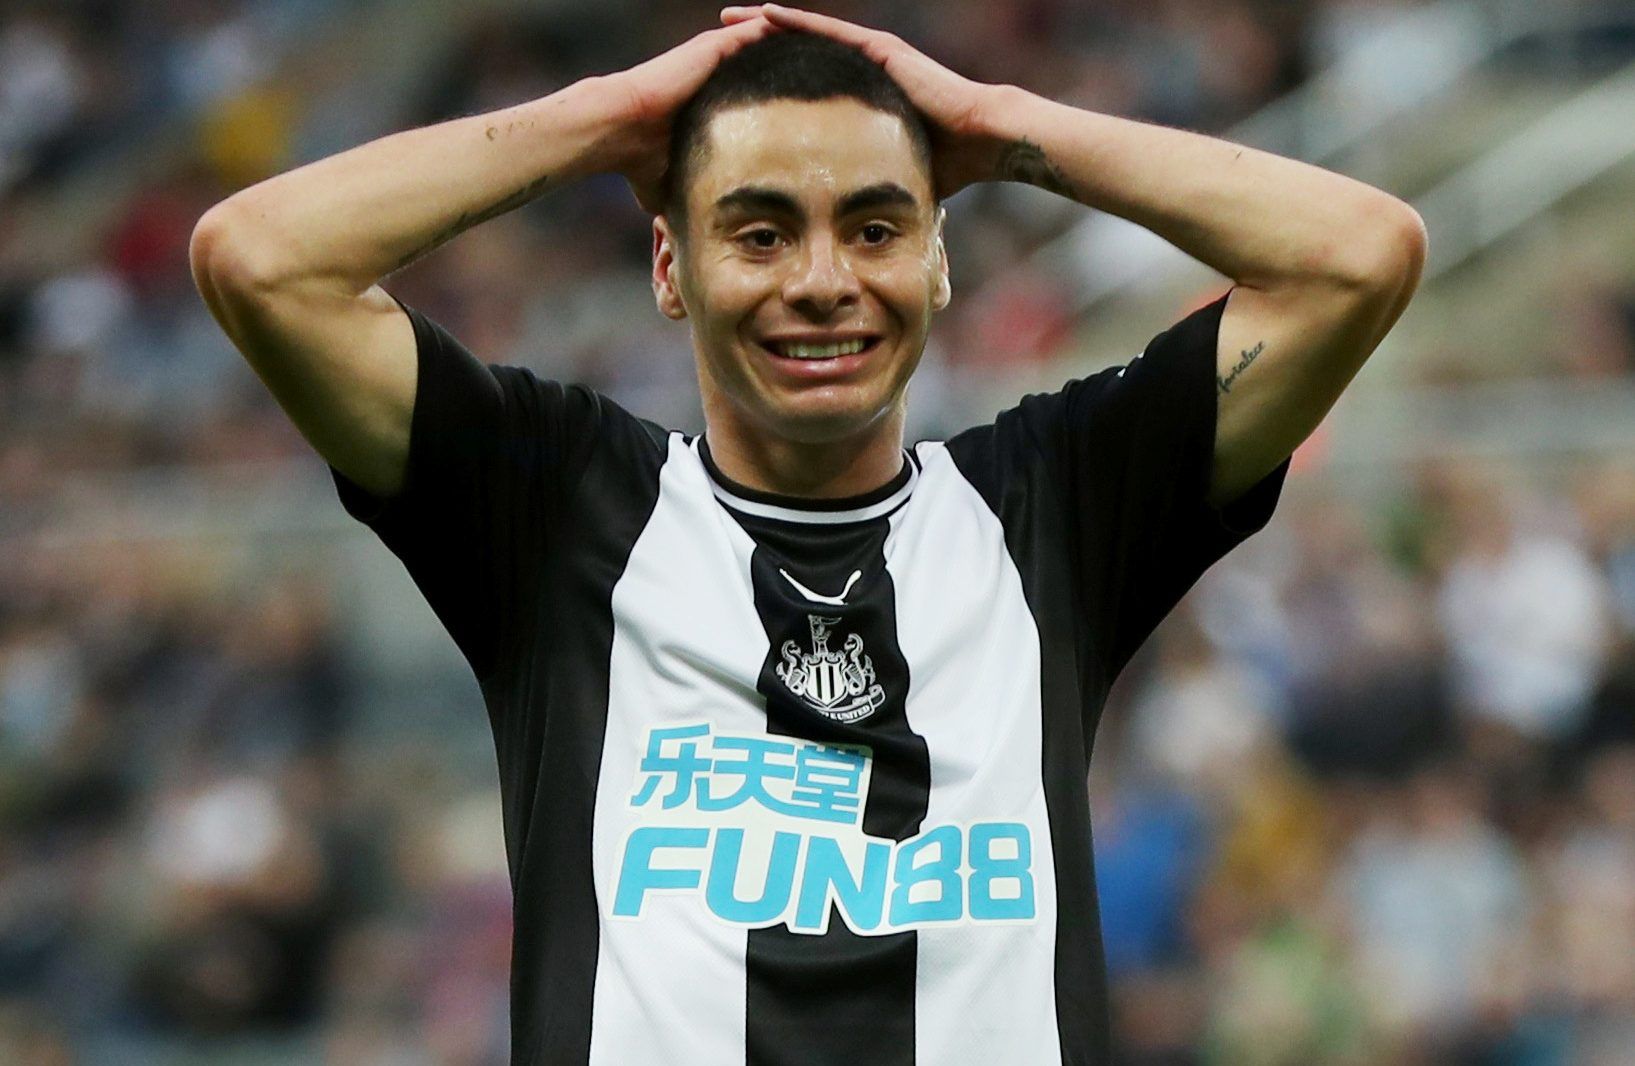 Soccer Football - Premier League - Newcastle United v Brighton &amp; Hove Albion - St James' Park, Newcastle, Britain - September 21, 2019  Newcastle United's Miguel Almiron reacts after a missed chance  Action Images via Reuters/Lee Smith  EDITORIAL USE ONLY. No use with unauthorized audio, video, data, fixture lists, club/league logos or 